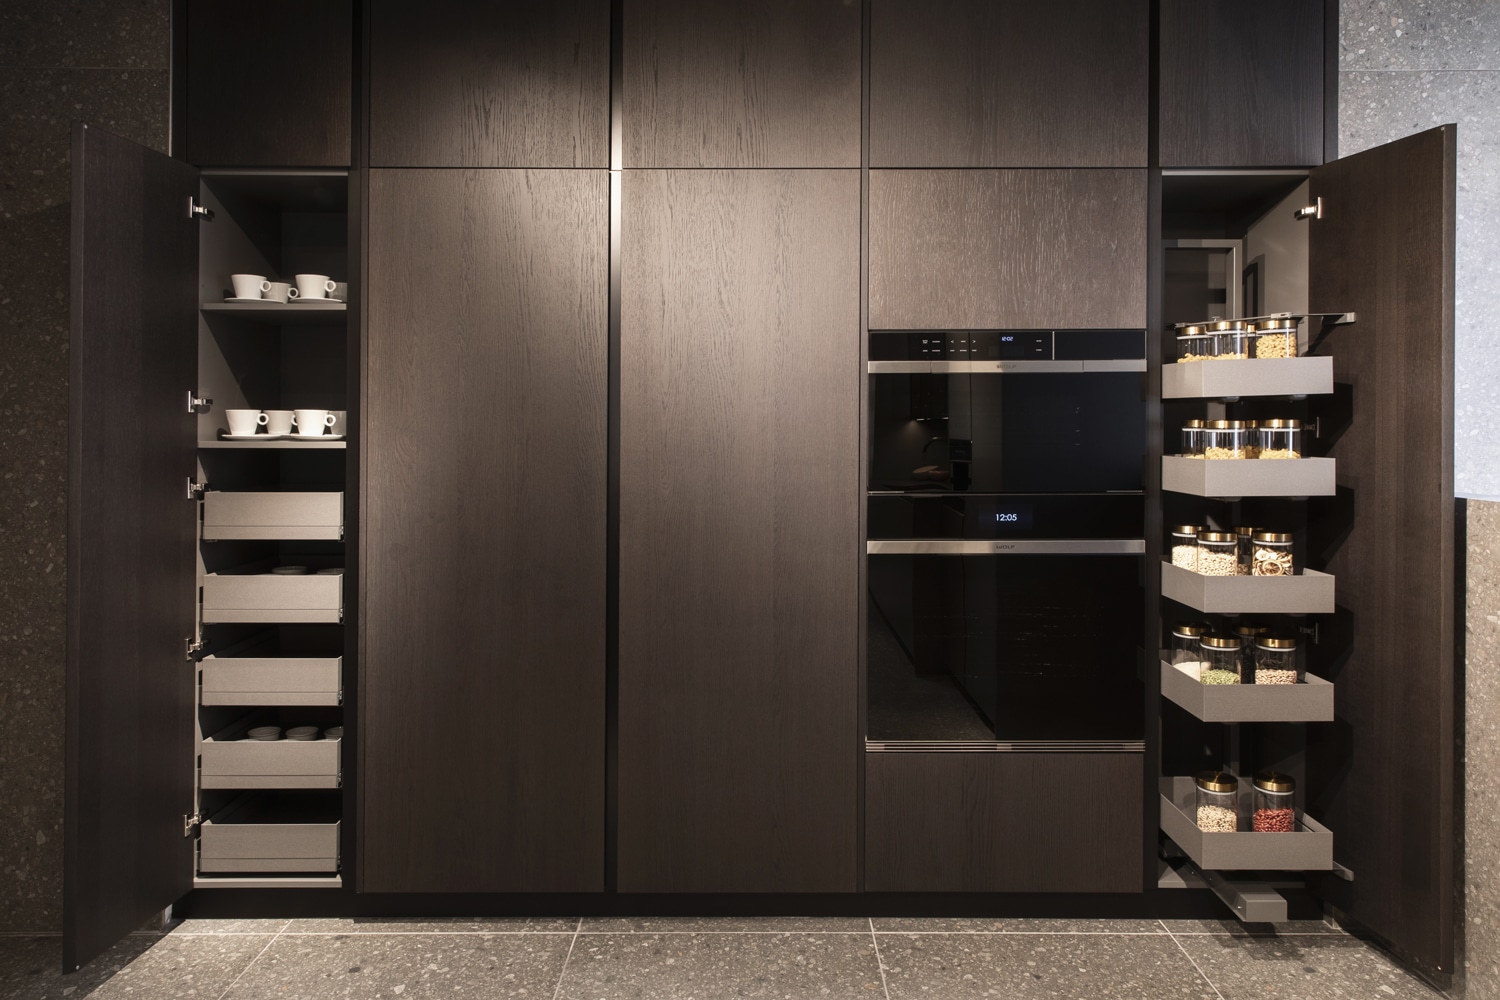 To the side of the same pantry unit, two cabinets with customized interiors based on the user's needs.